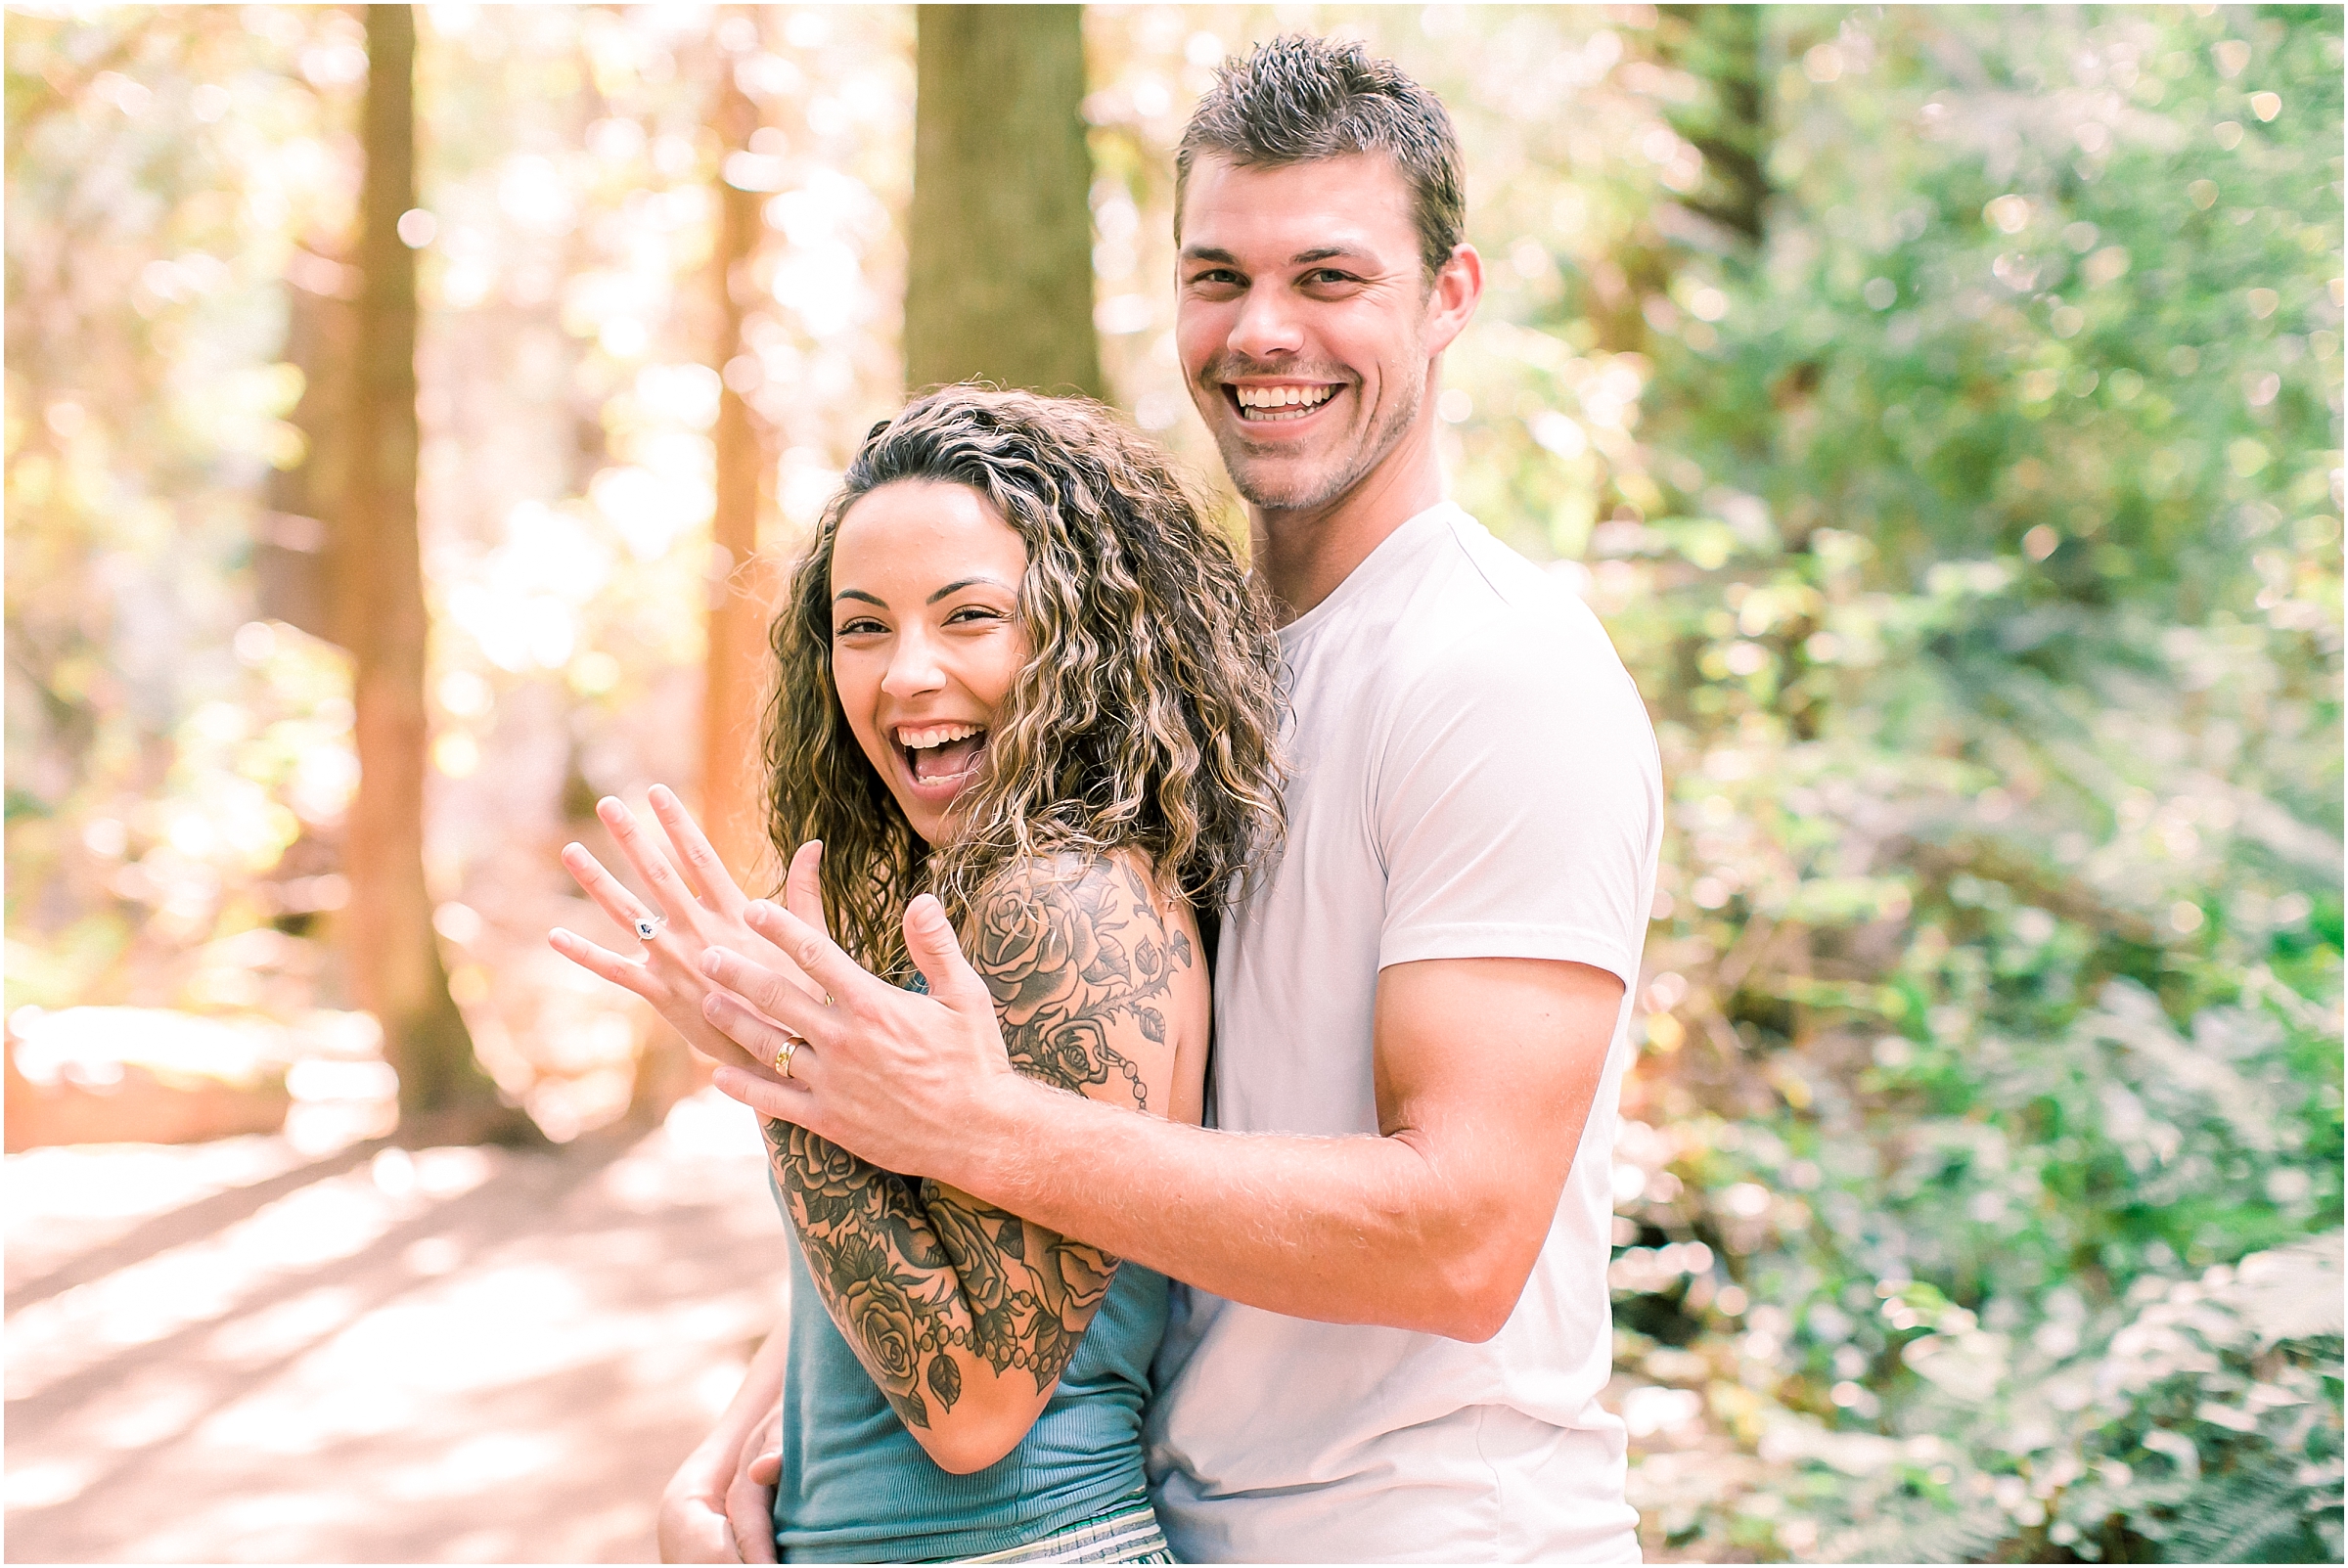 Lord Hill Park Engagement | Taylor & Makayla